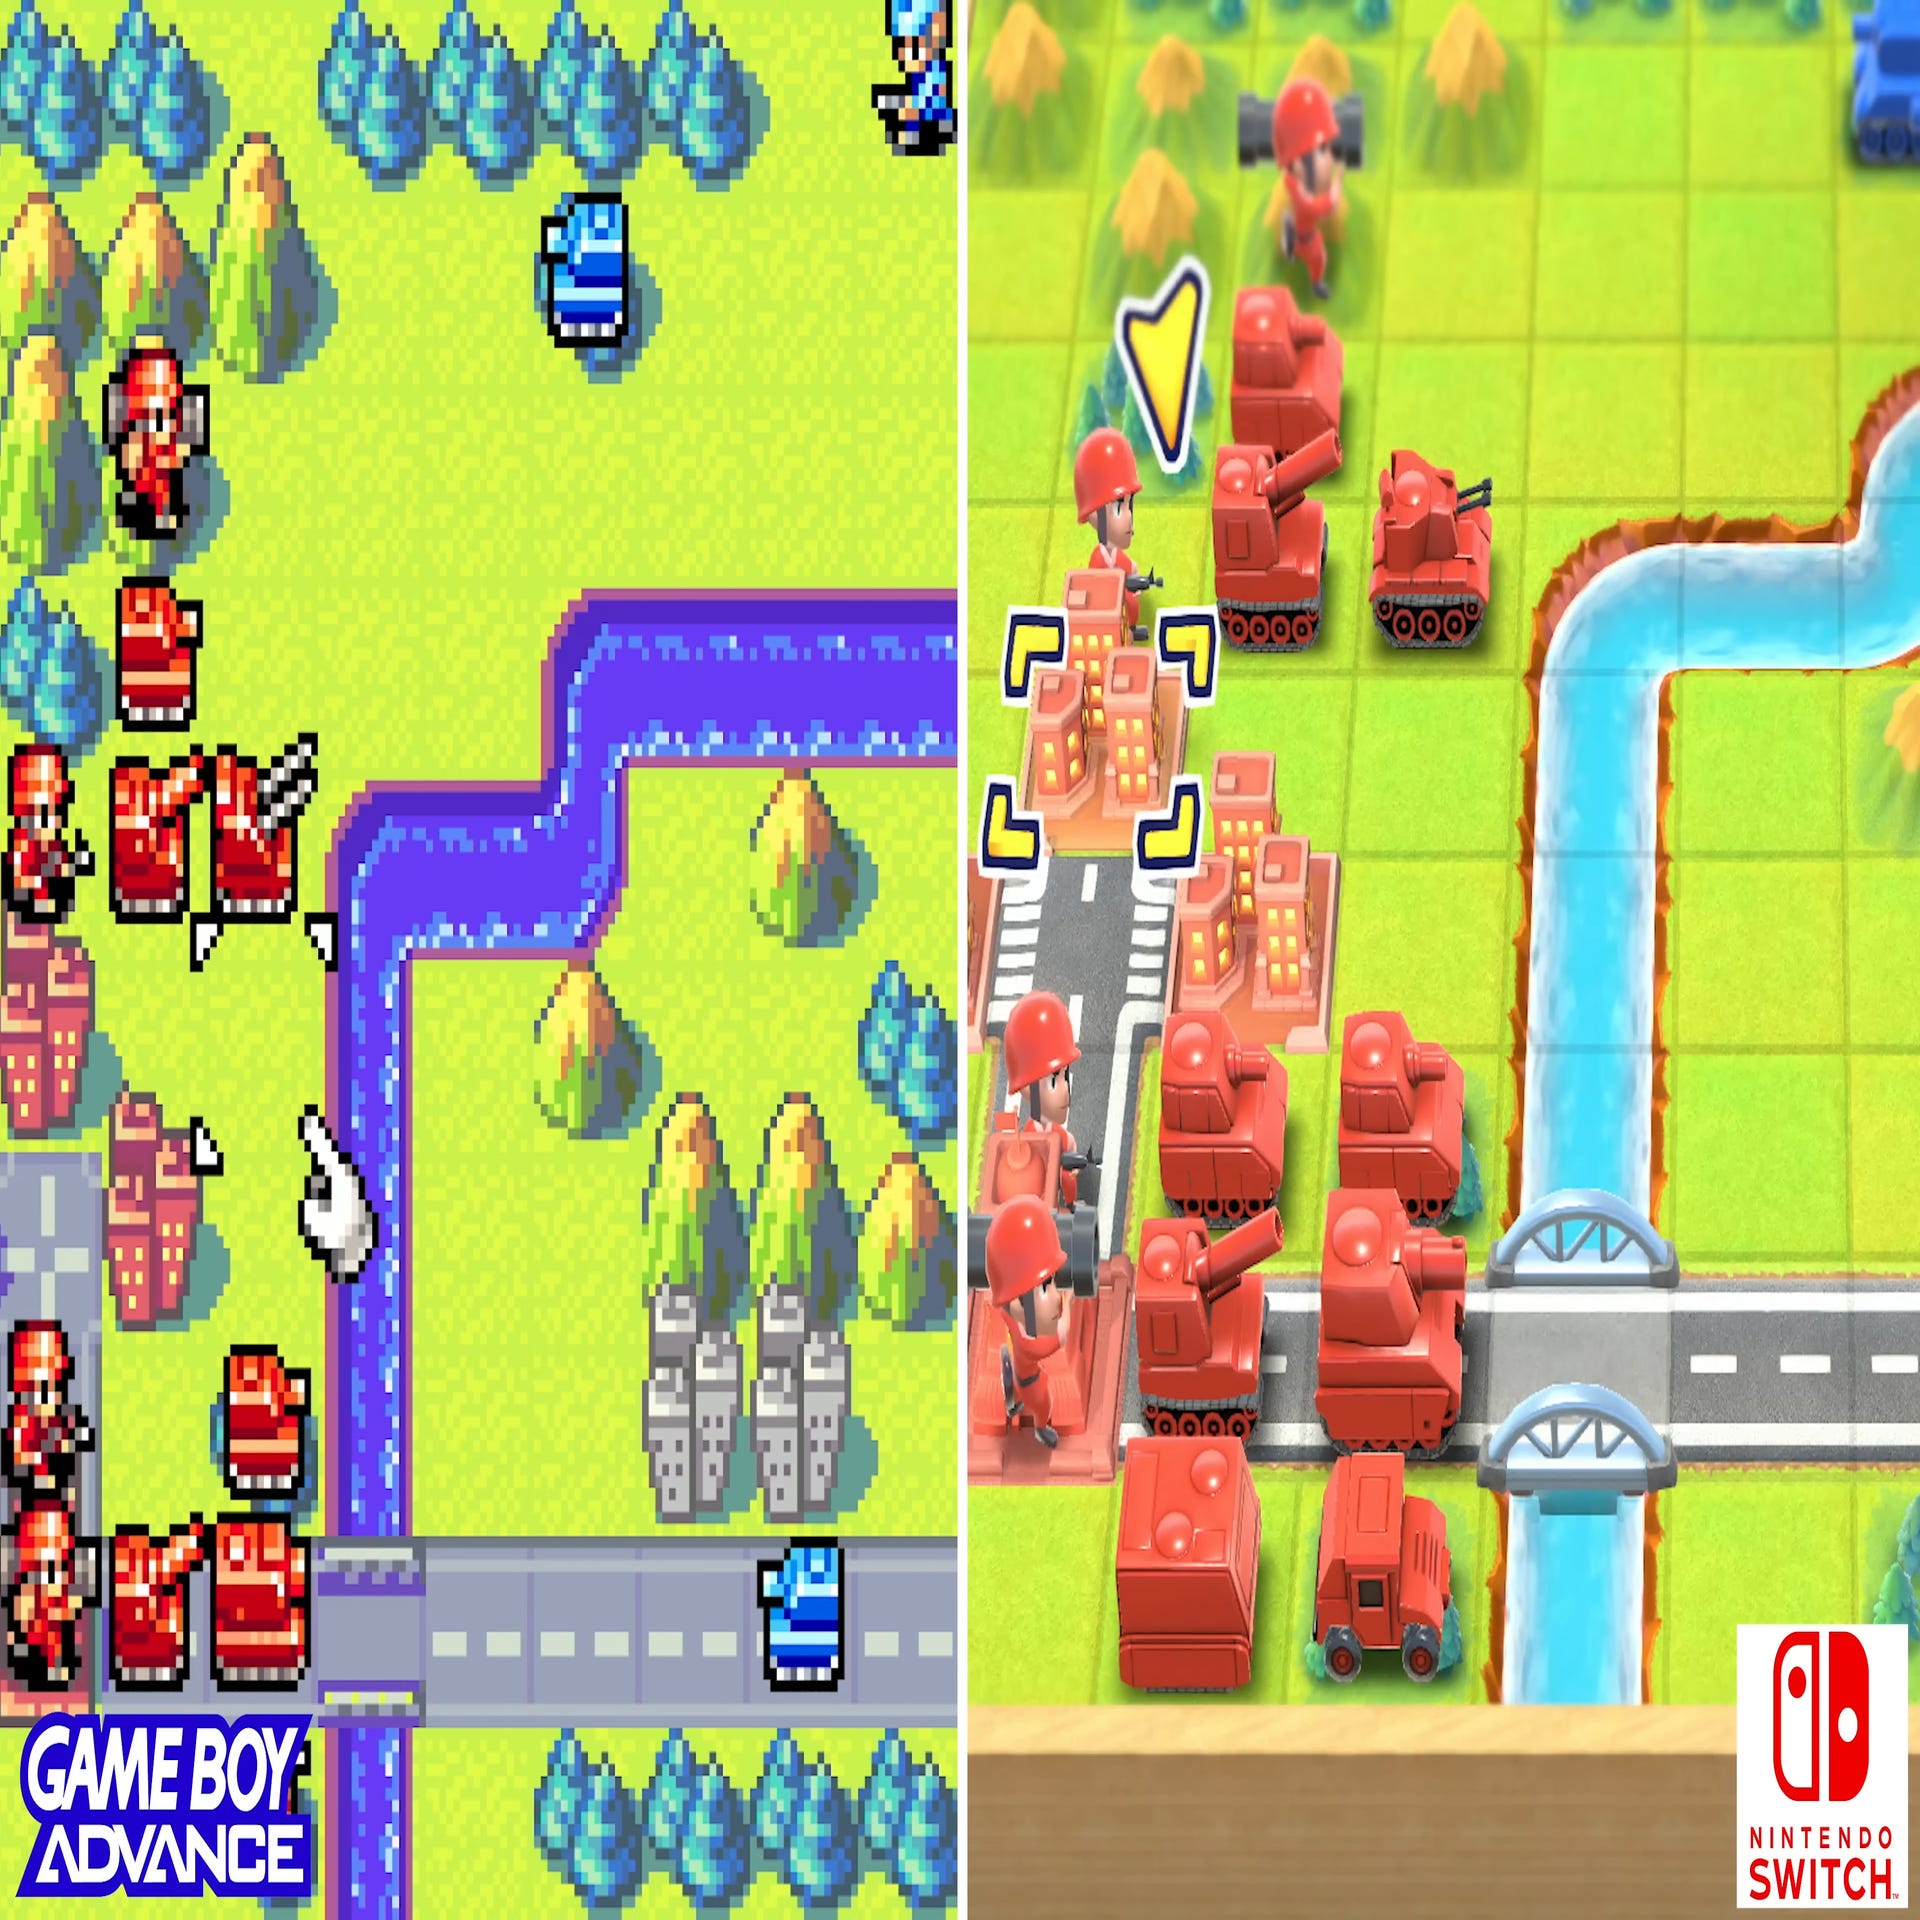 Advance Wars 1+2 Re-Boot Camp: an disappointing enjoyable tempered by visuals remake